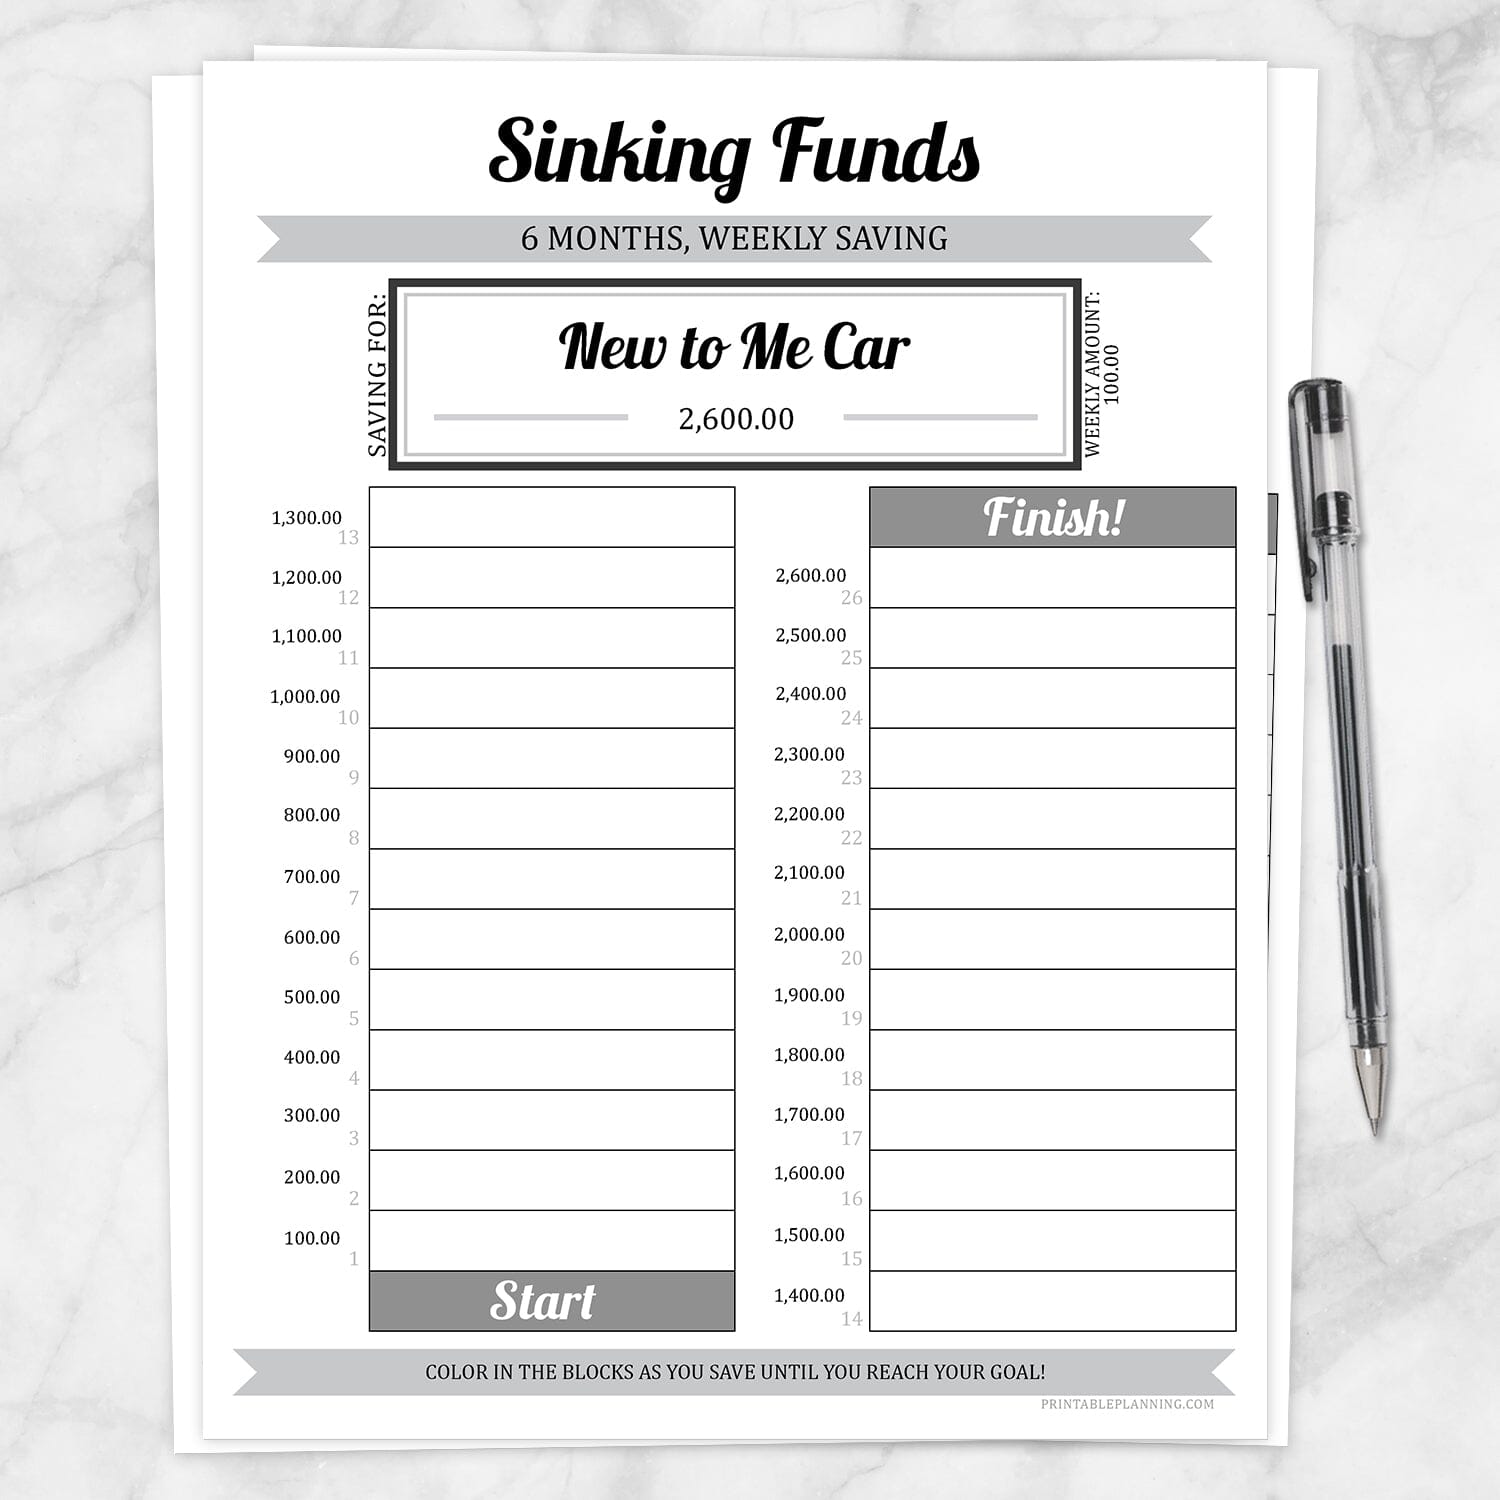 Sinking Funds Savings Chart, 6 Months Weekly - Printable at Printable